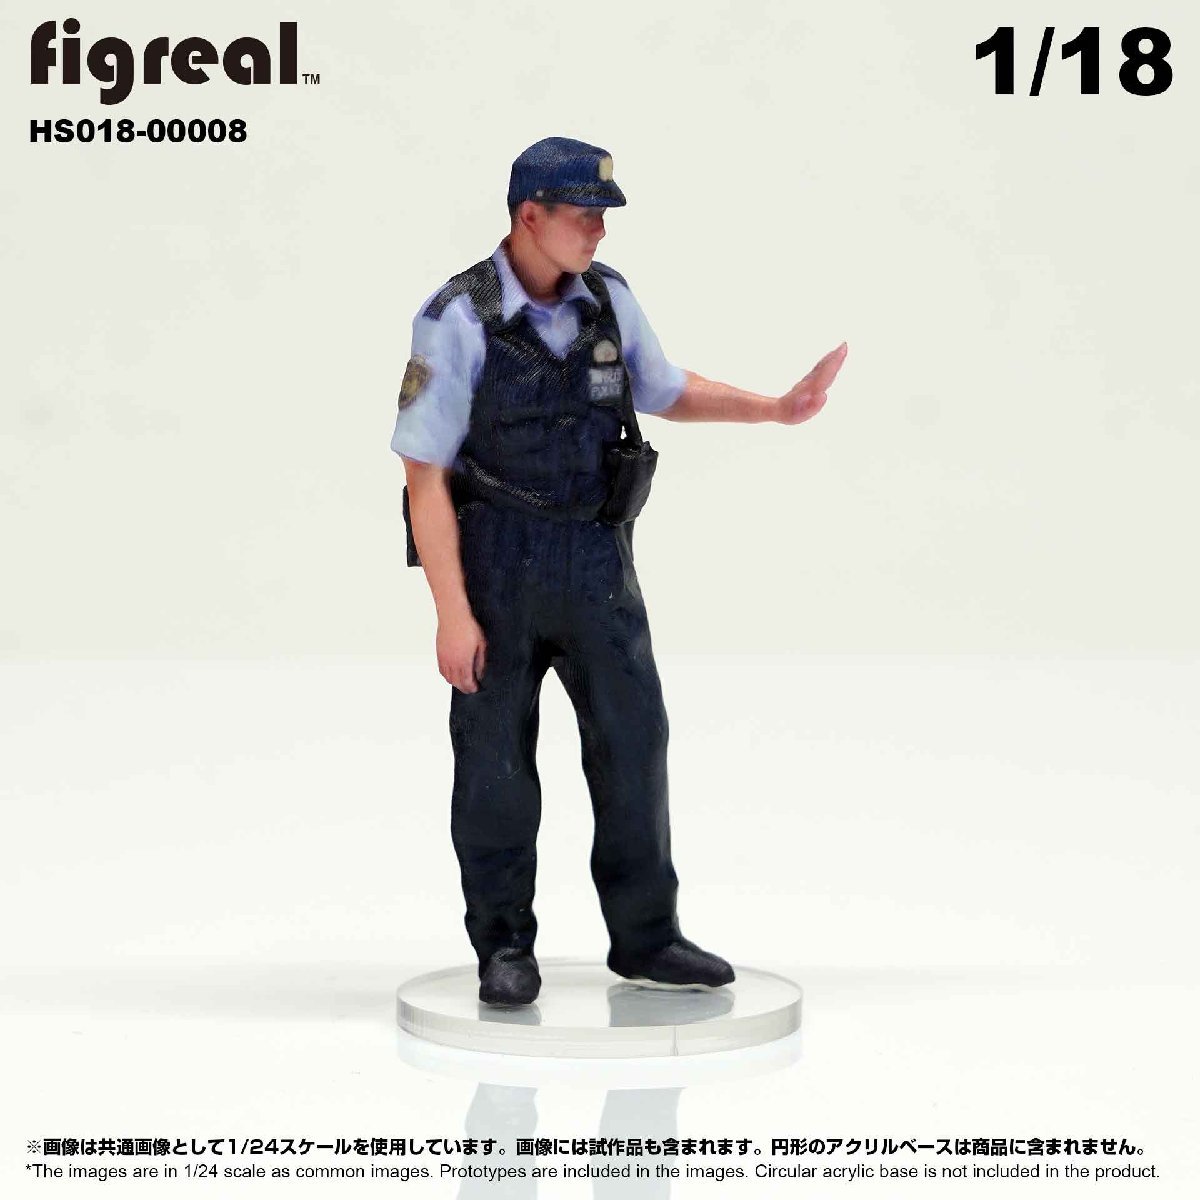 HS018-00008 figreal 日本警察官 1/18 高精細フィギュア_画像5